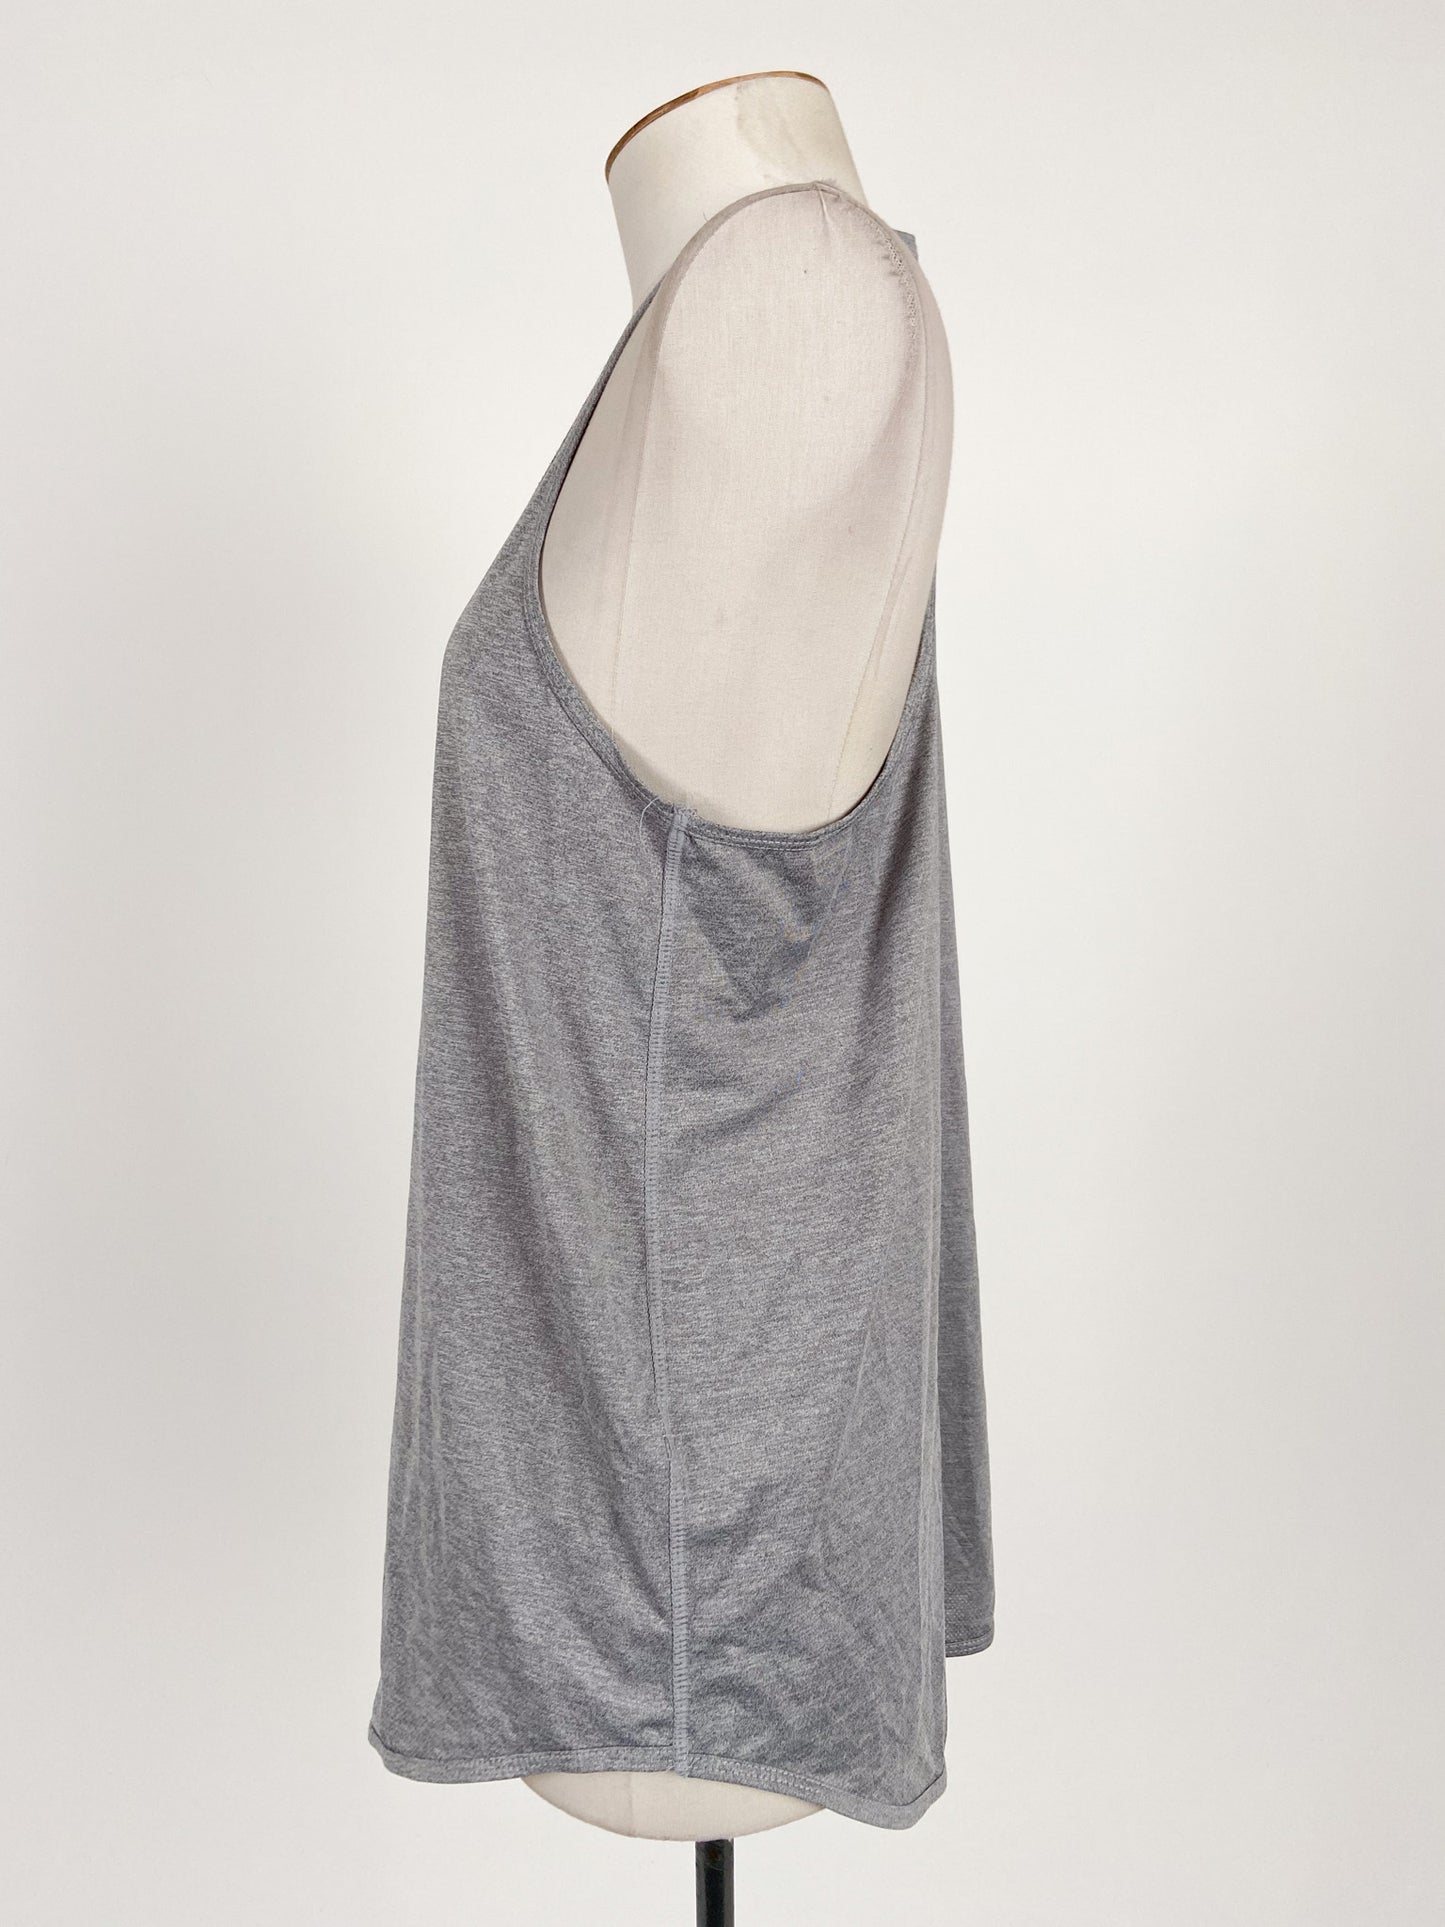 Cotton On | Grey Casual Activewear Top | Size S